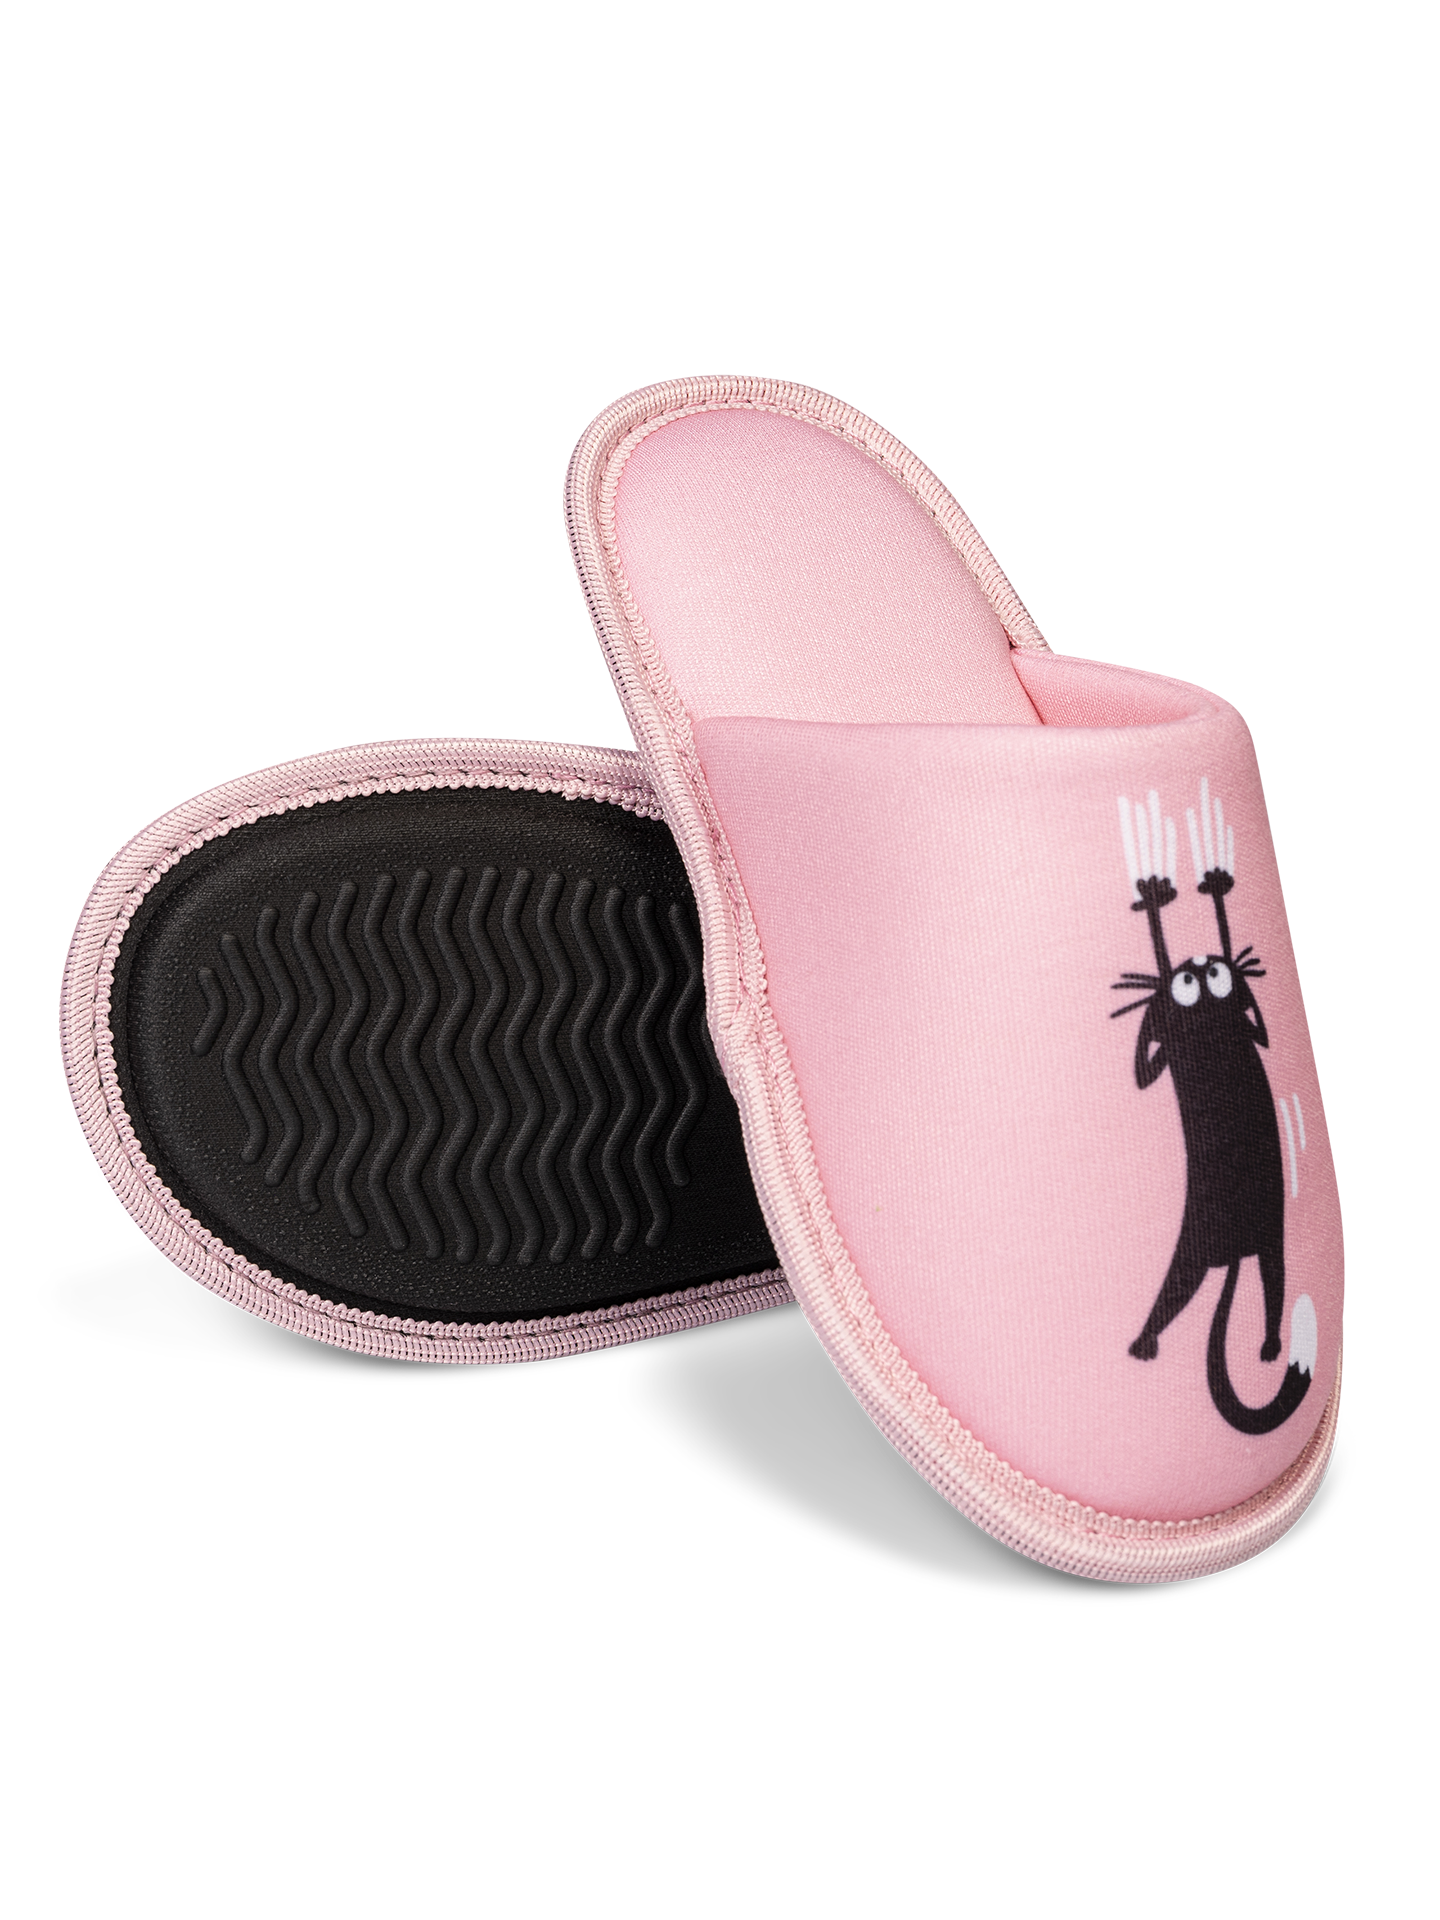 Kids' Slippers Pink Cats